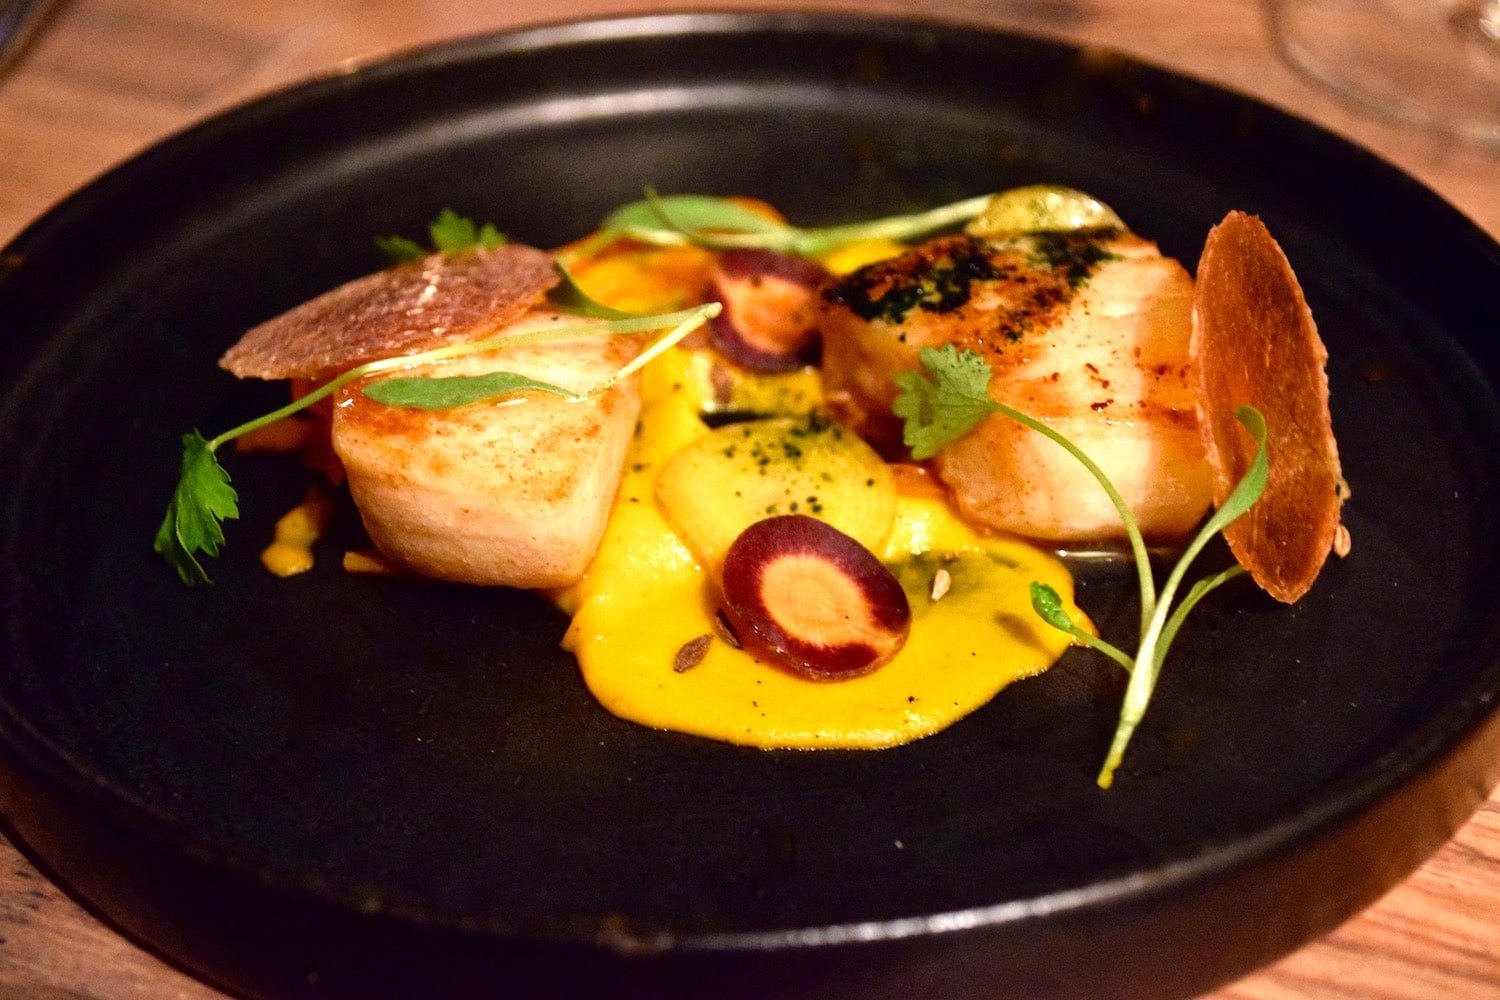 Scallops with carrot puree at Hawkyns Restaurant, Amersham